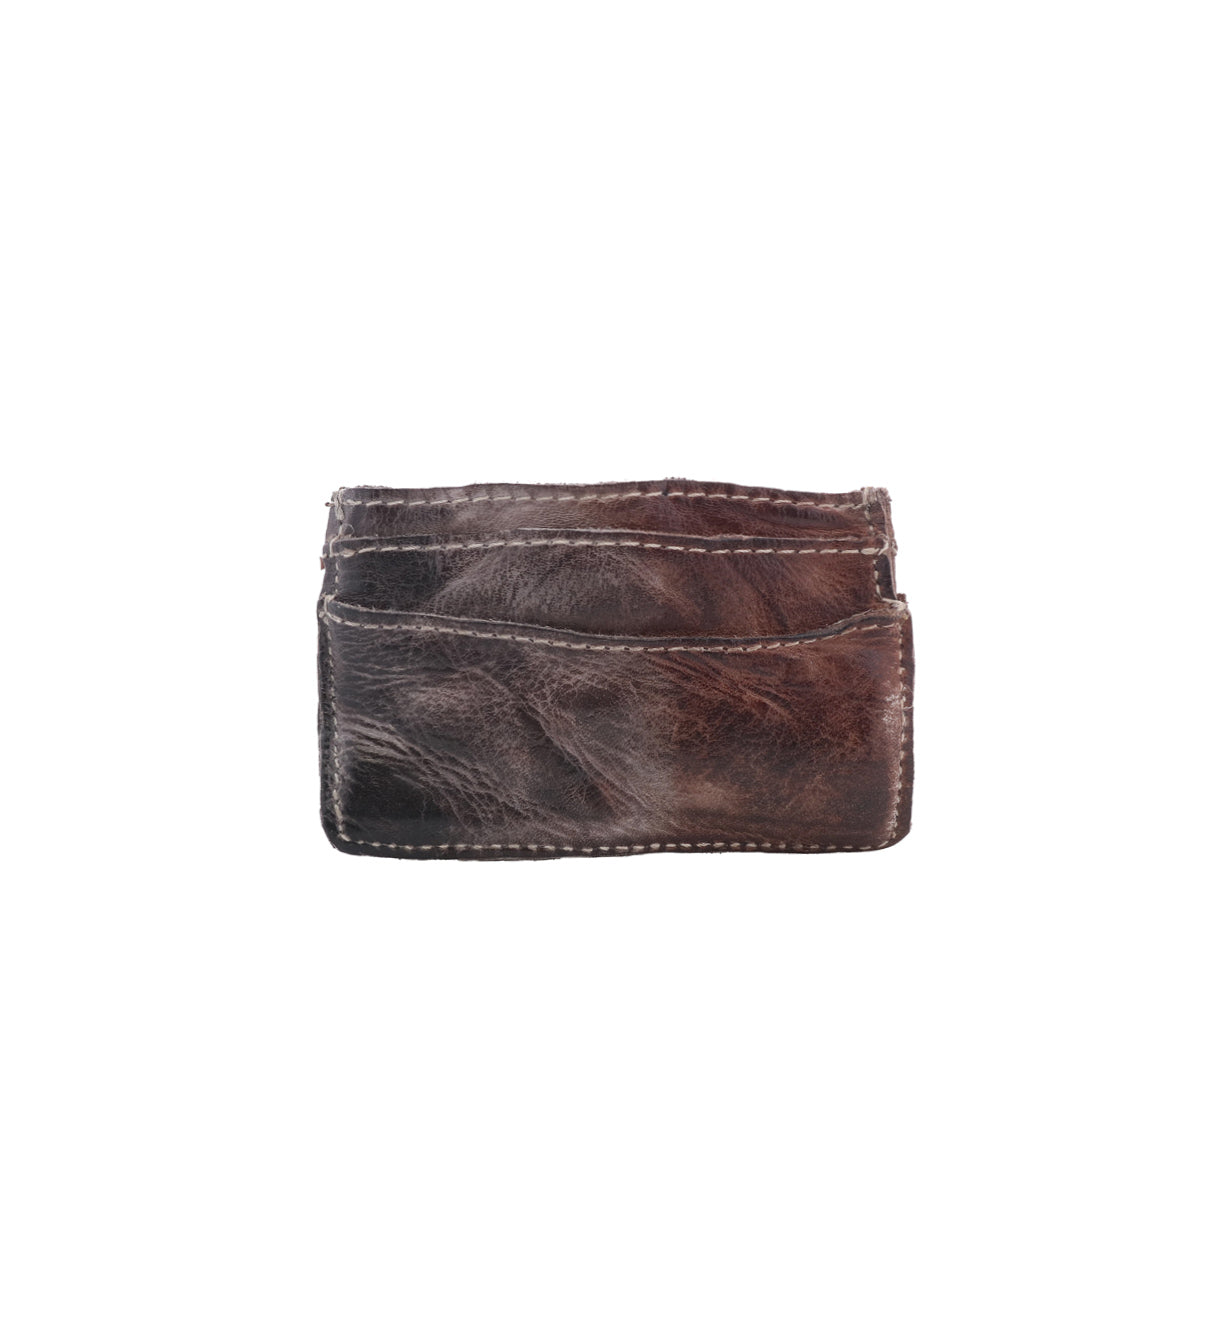 A Chuck Bed Stu brown leather wallet on a white background.